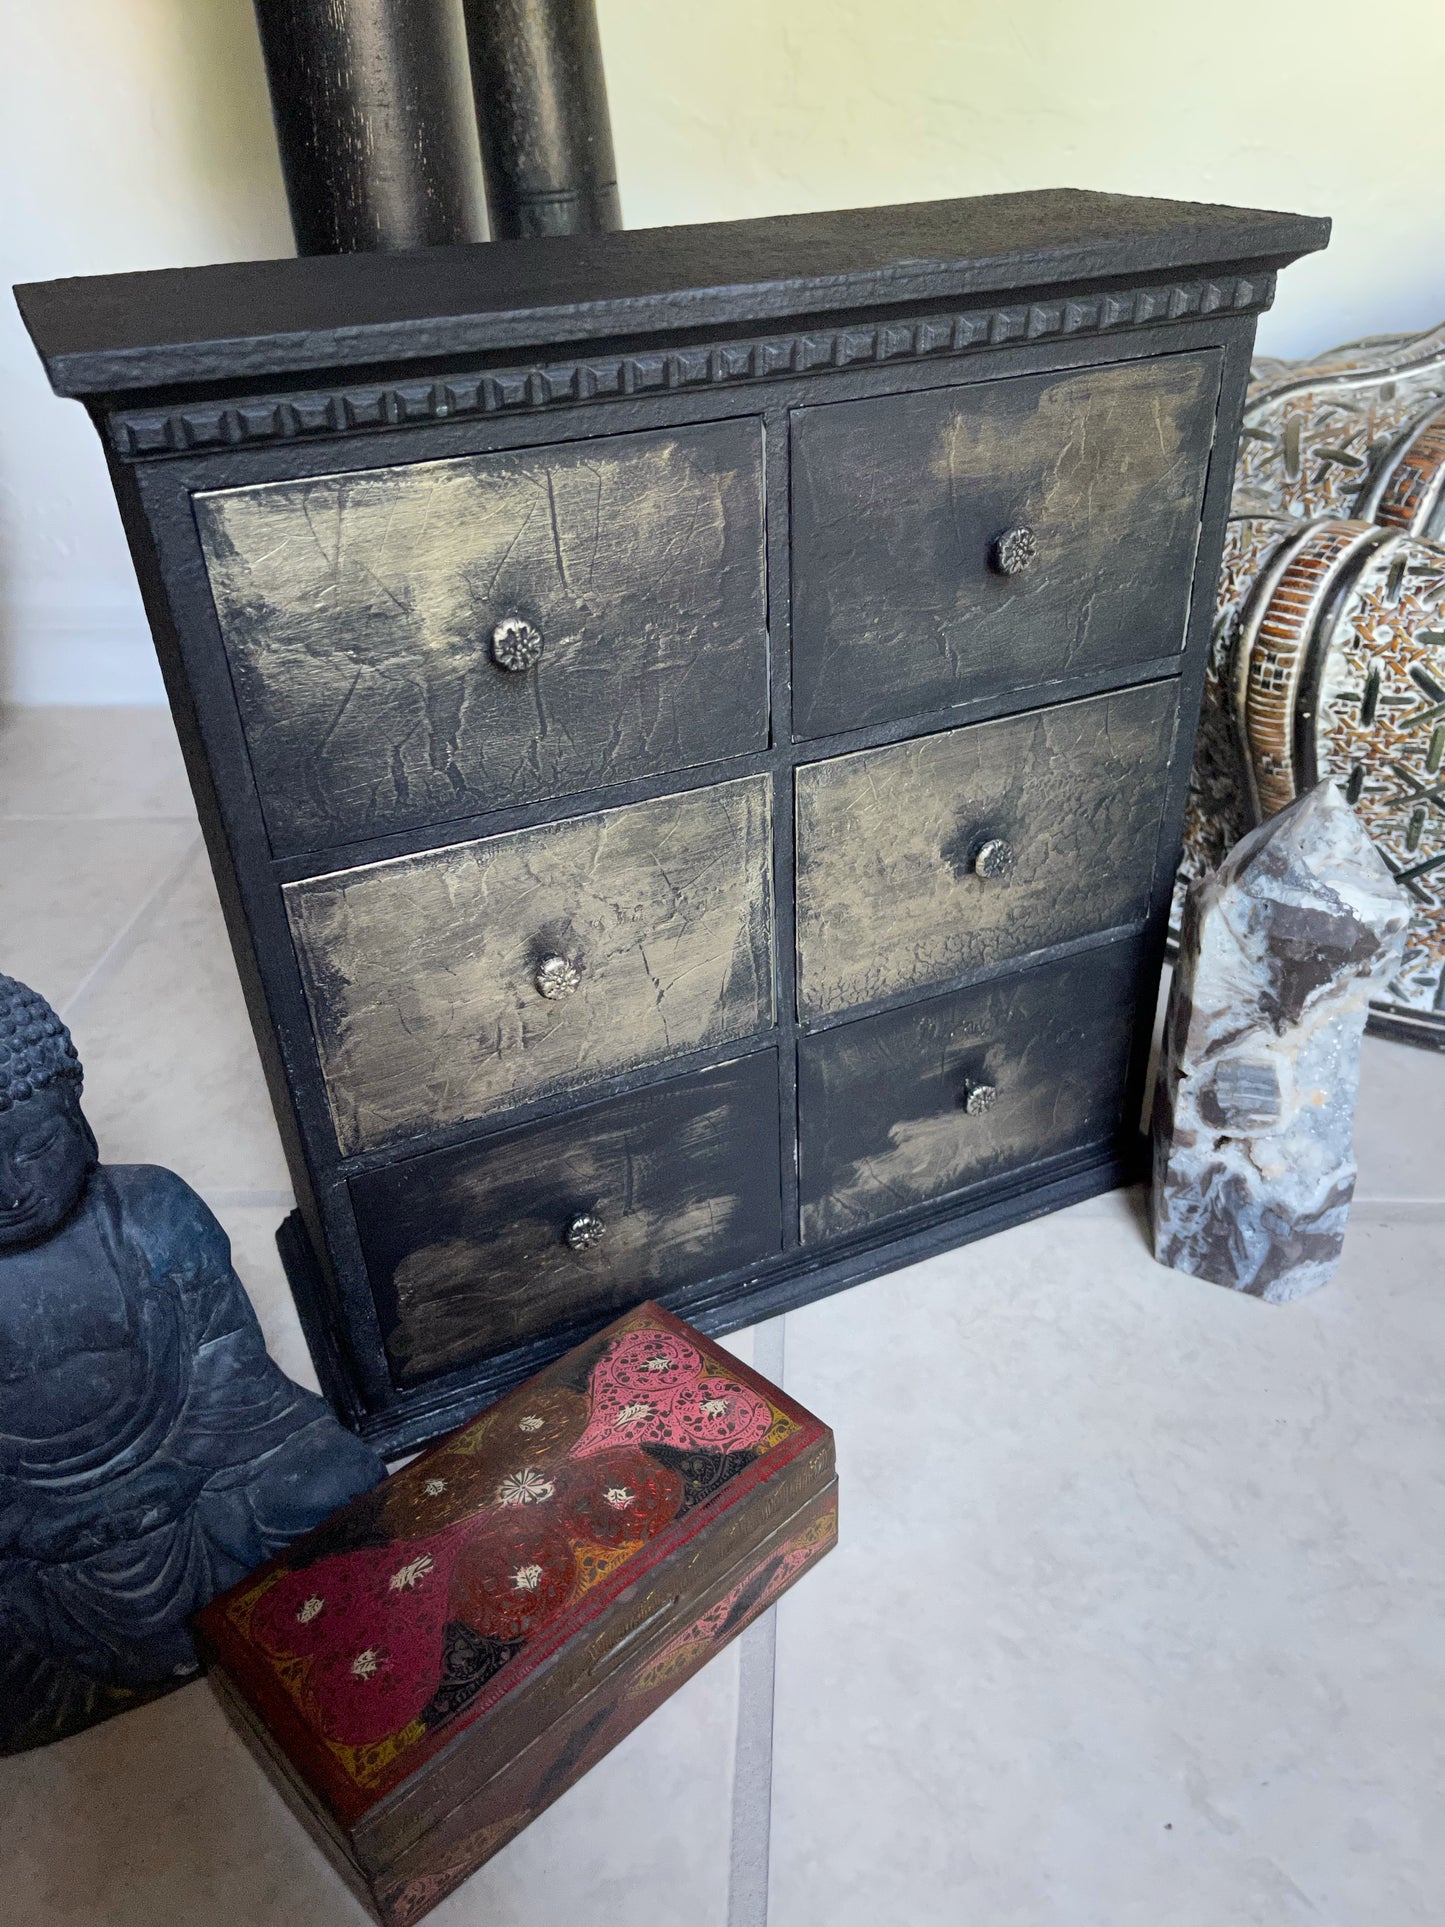 Lovecycled Vintage Cabinet, Black Magic, Home Decor